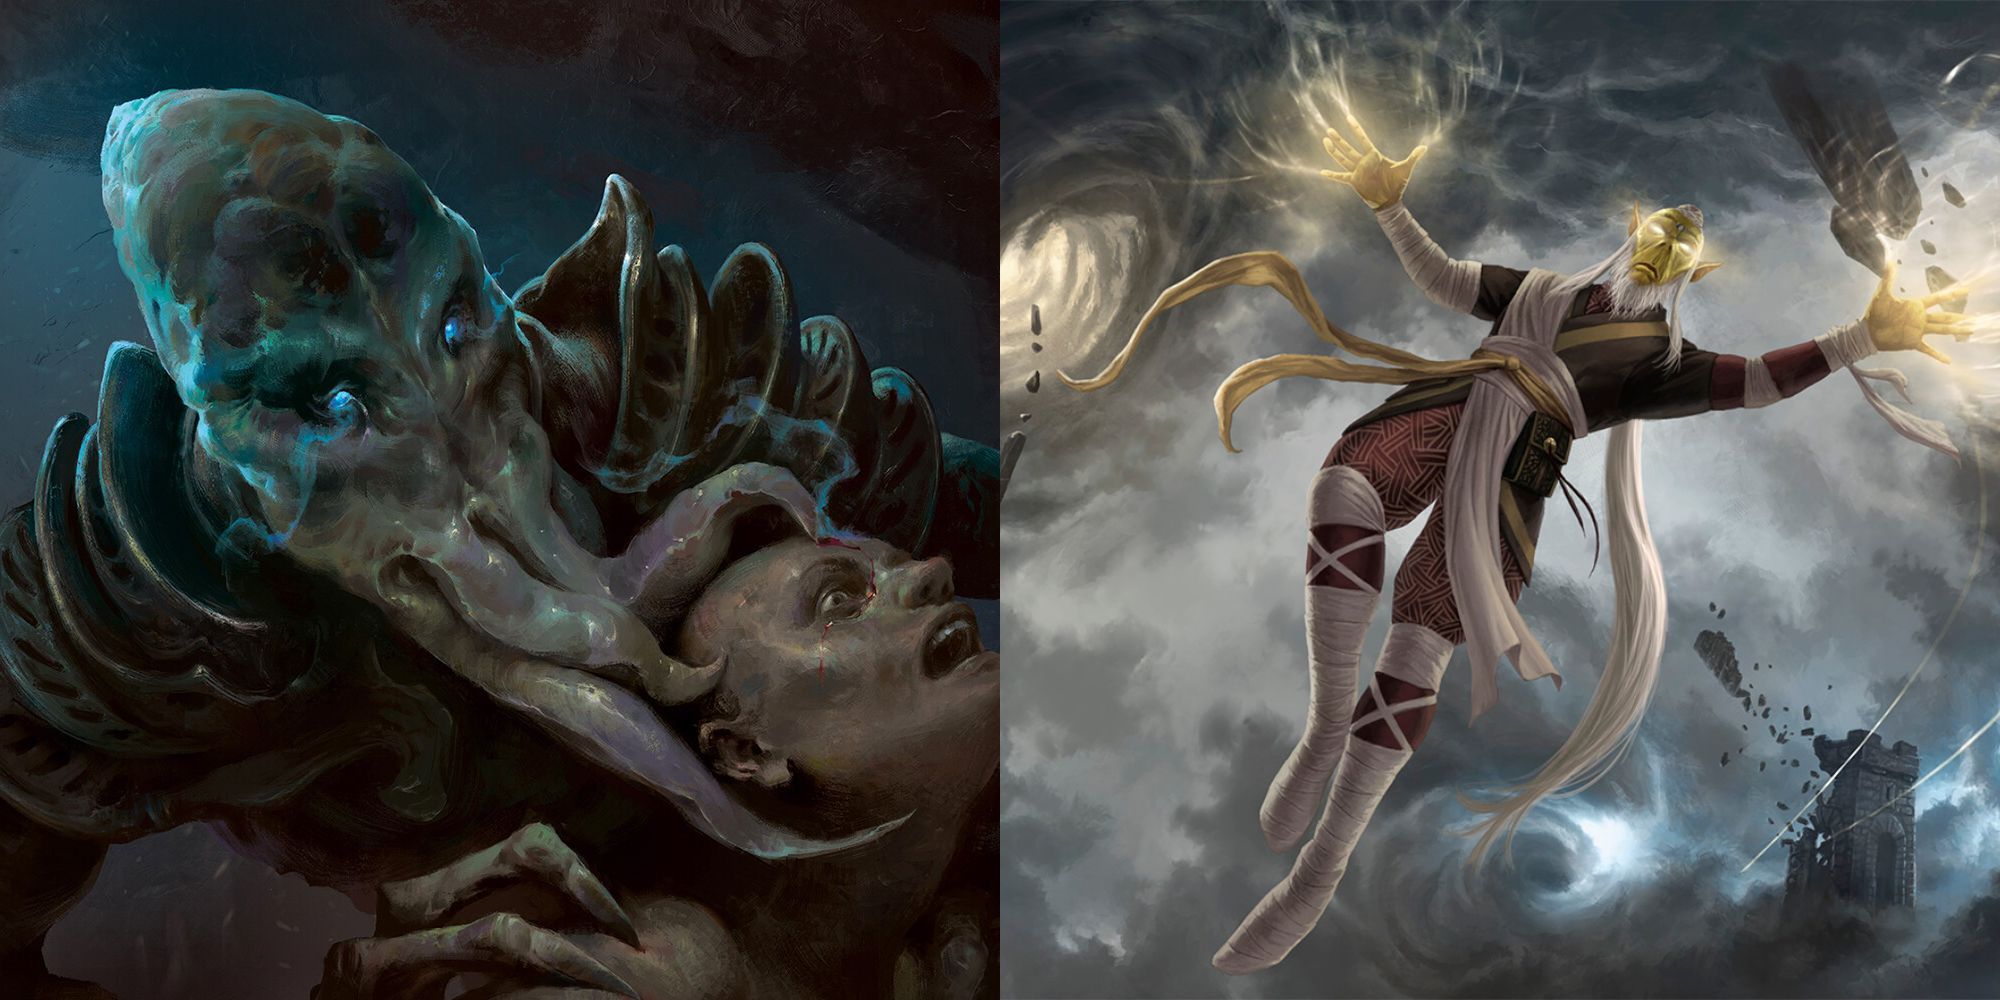 Left: A mindflayer grappling a human, RIght: A Githzerai monk floating